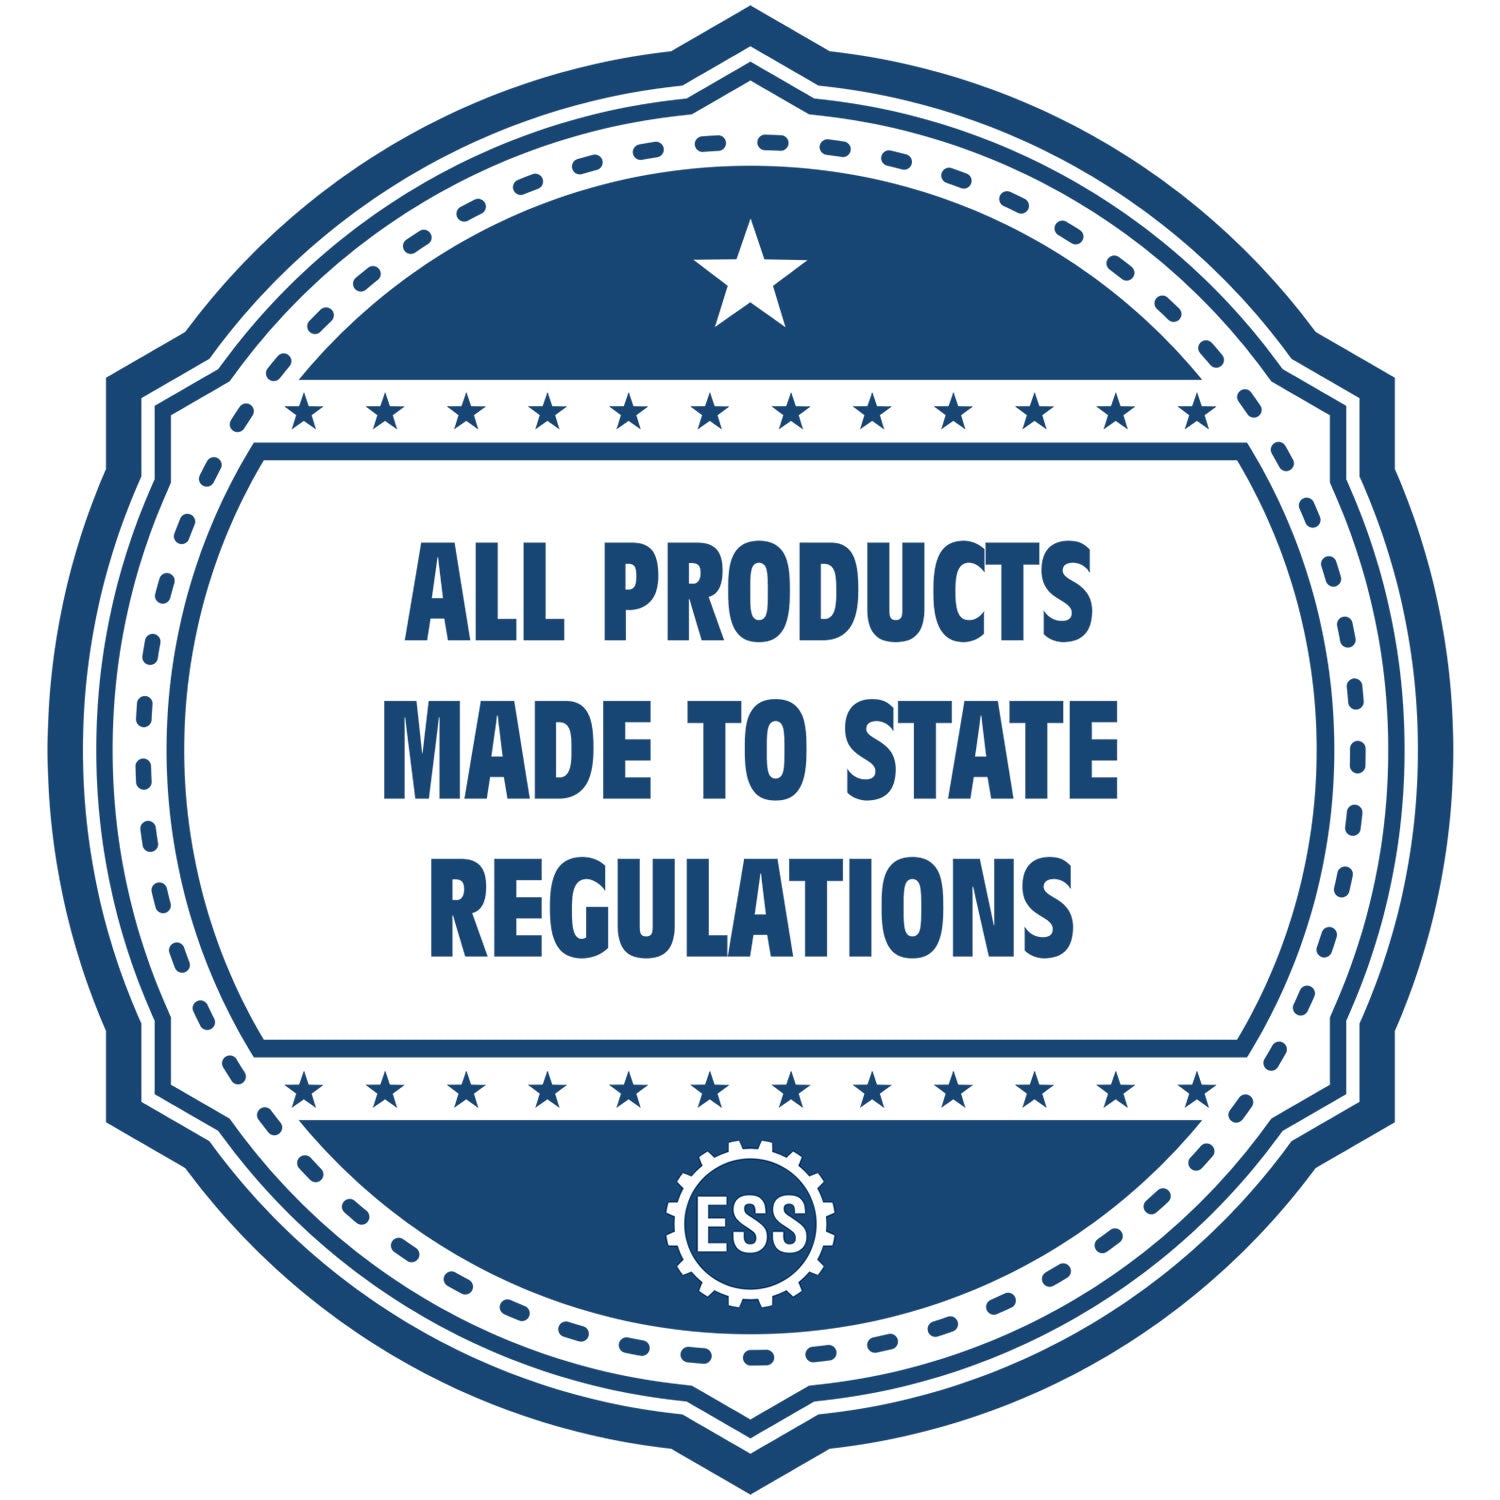 An icon or badge element for the Wisconsin Engineer Desk Seal showing that this product is made in compliance with state regulations.